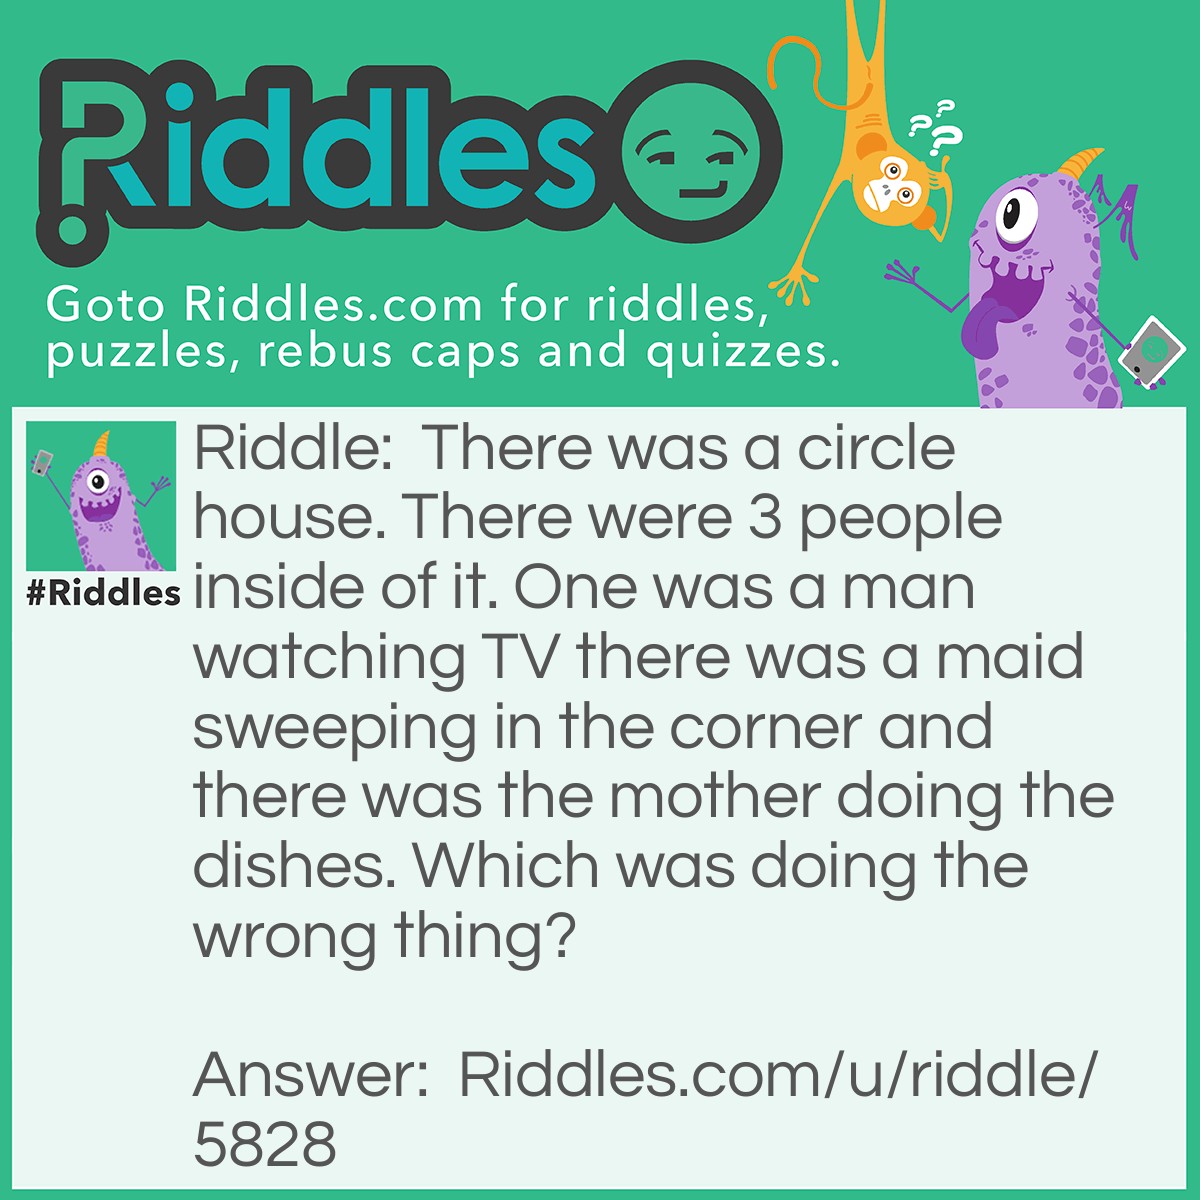 Riddle: There was a circle house. There were 3 people inside of it. One was a man watching TV there was a maid sweeping in the corner and there was the mother doing the dishes. Which was doing the wrong thing? Answer: The maid because it was a circle house and there was no corner.